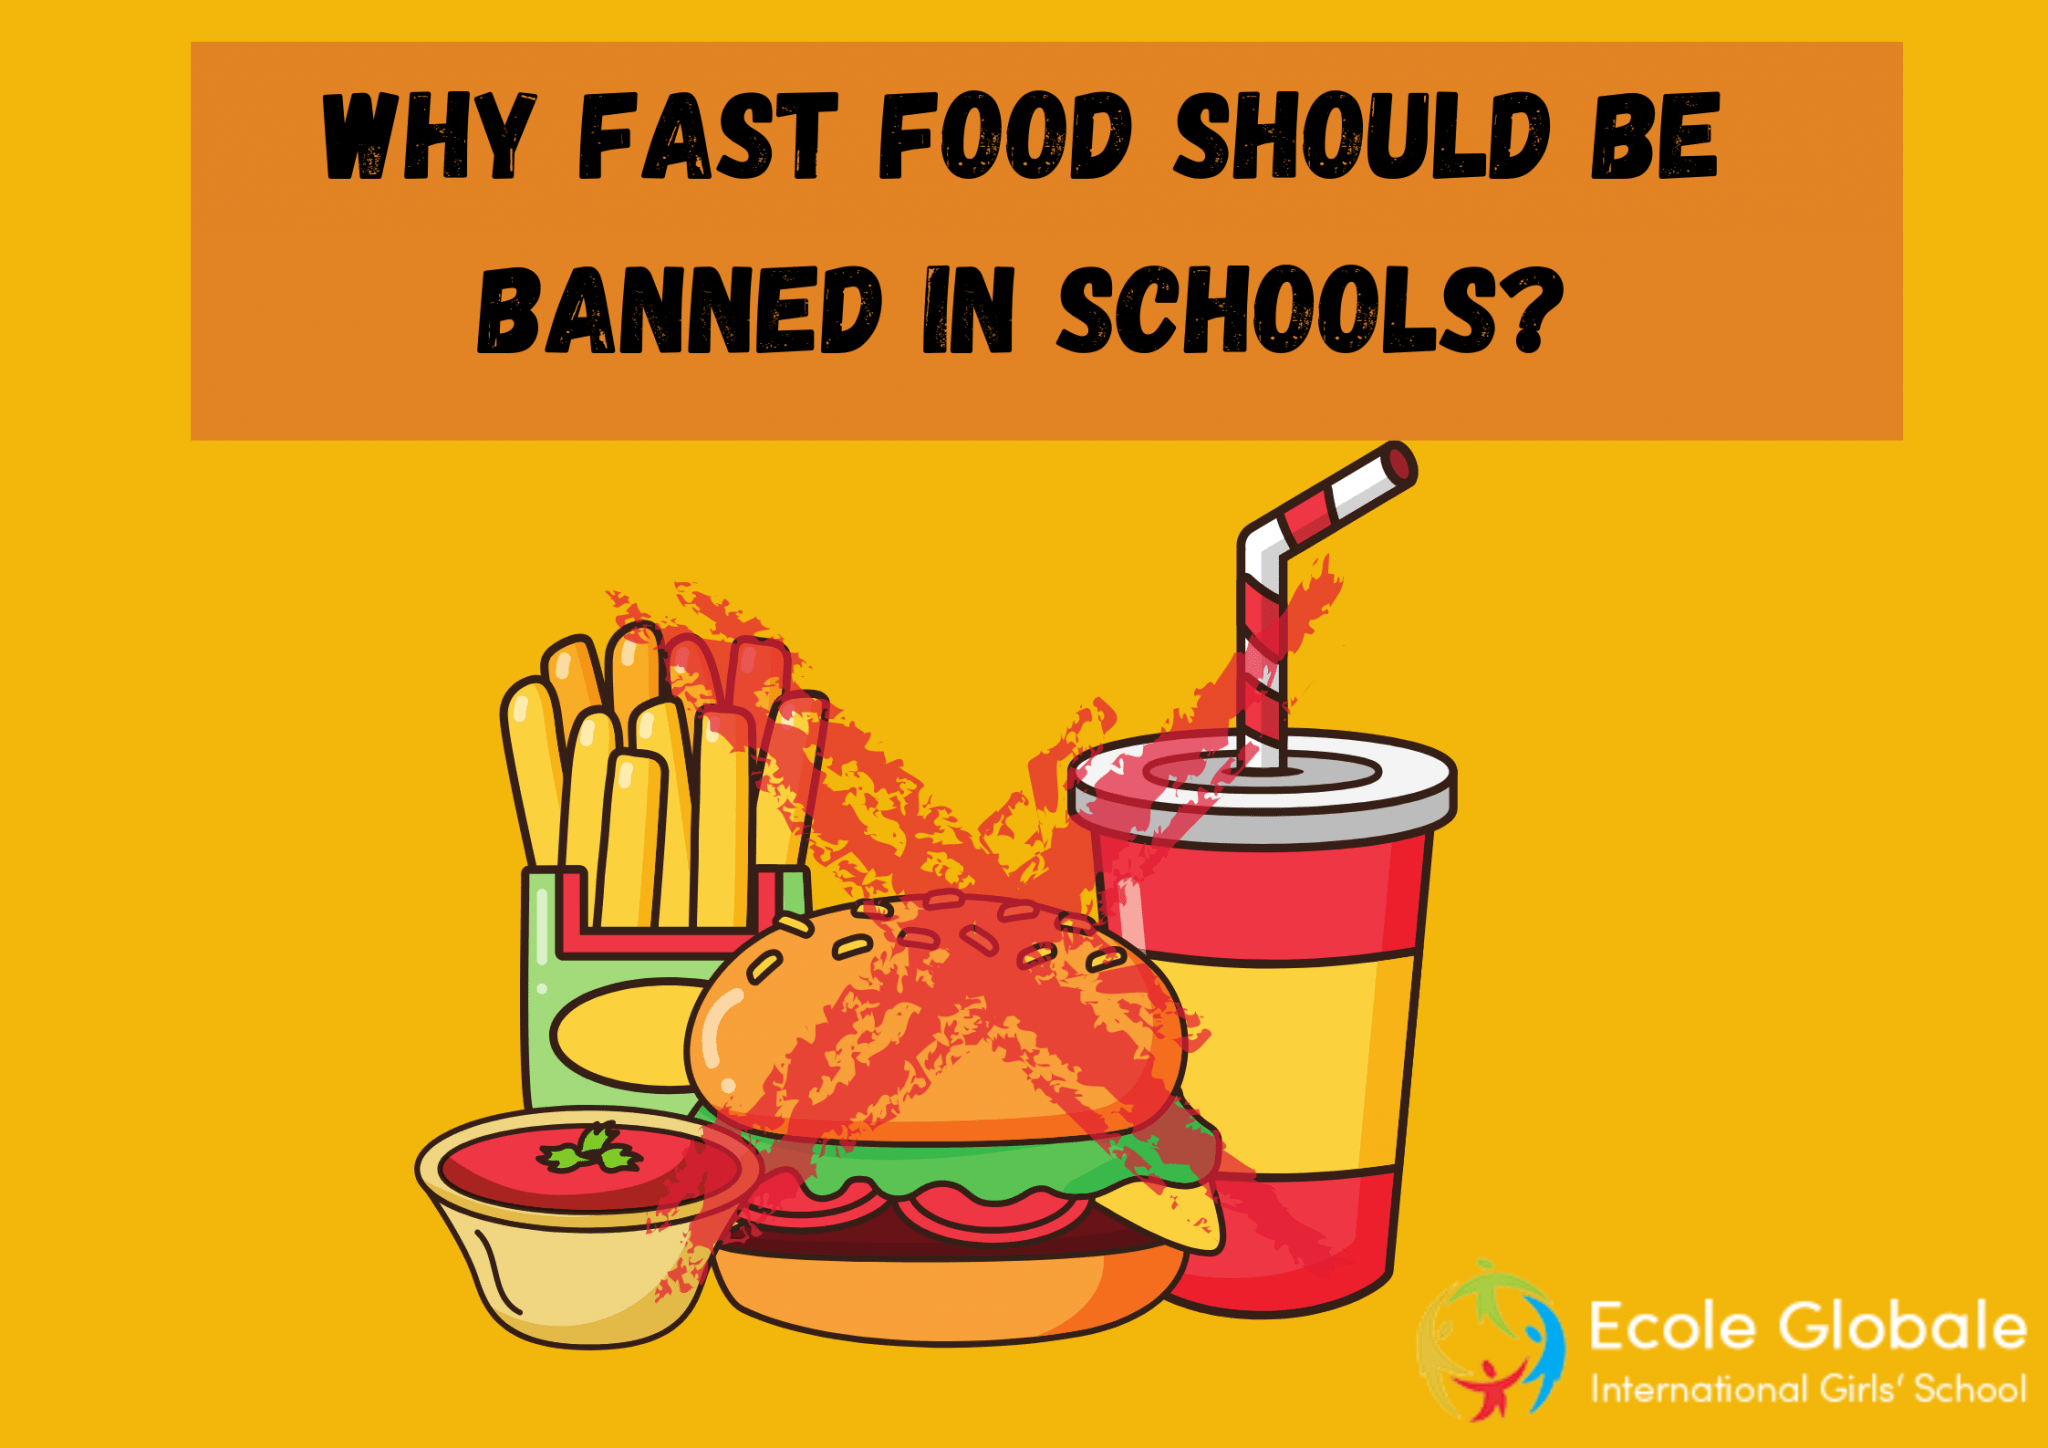 Why fast food should be banned in schools?